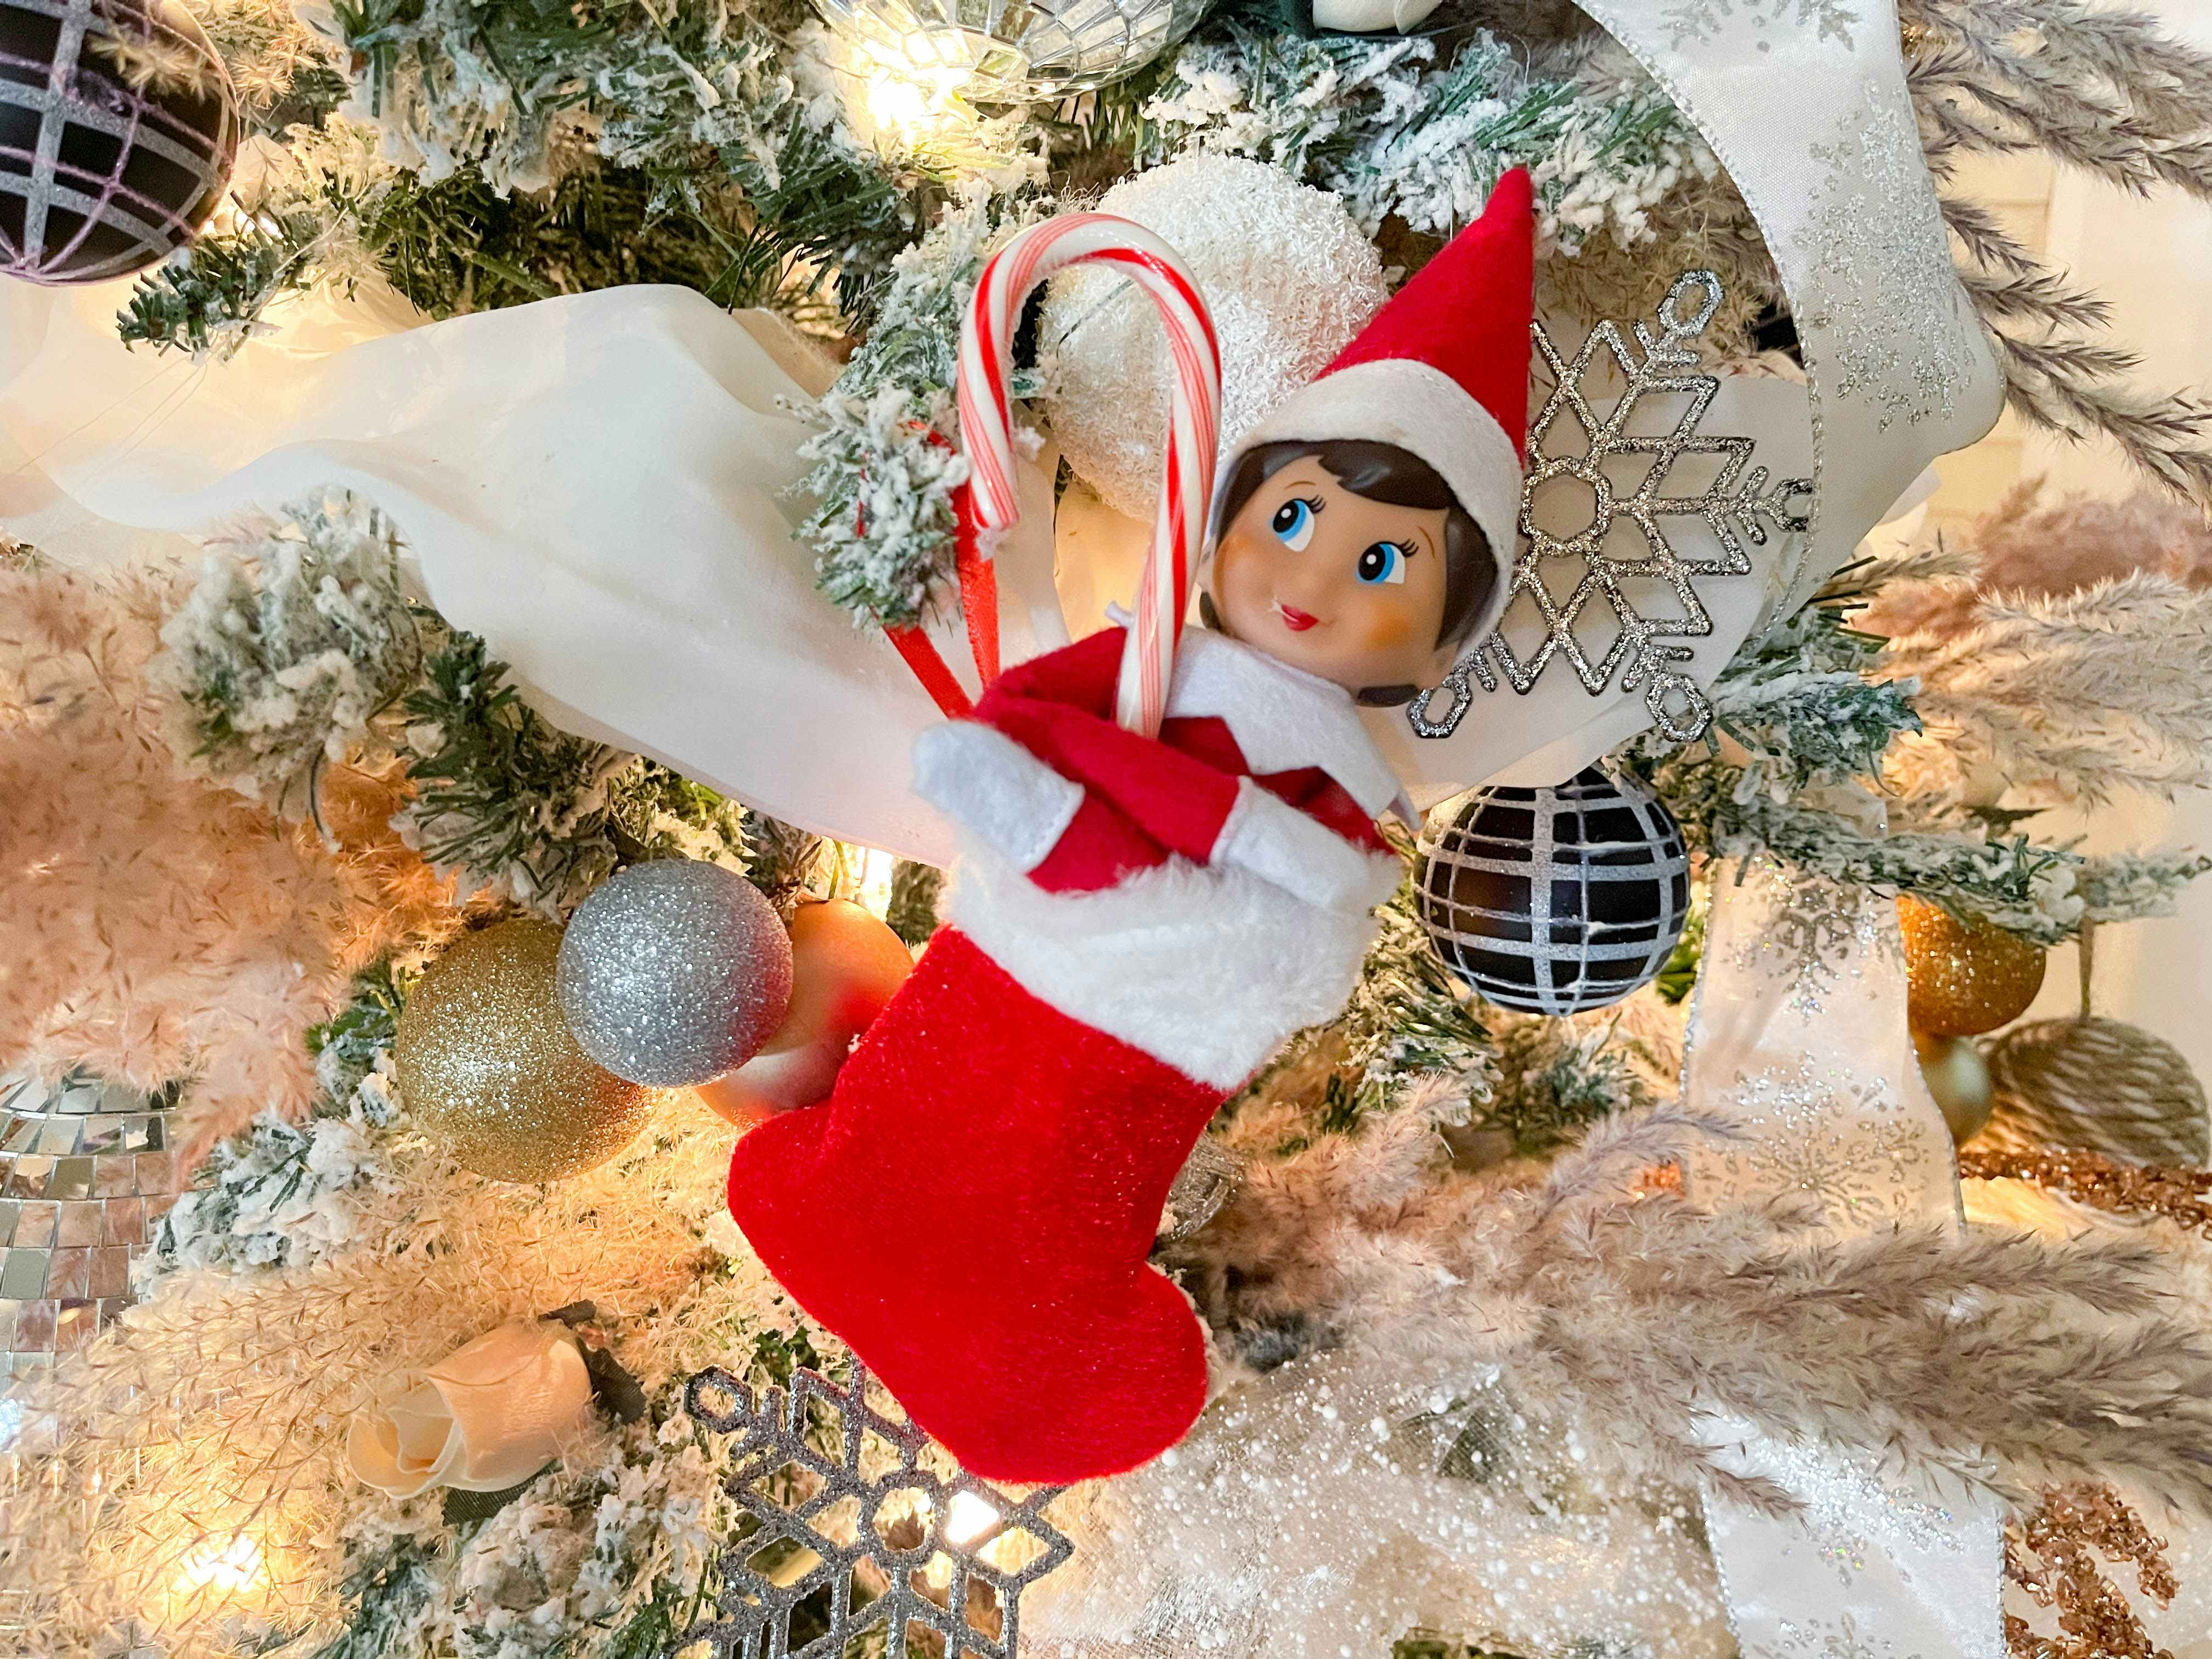 an elf on the shelf doll in a mini stocking holding a candy cane hanging in a christmas tree 